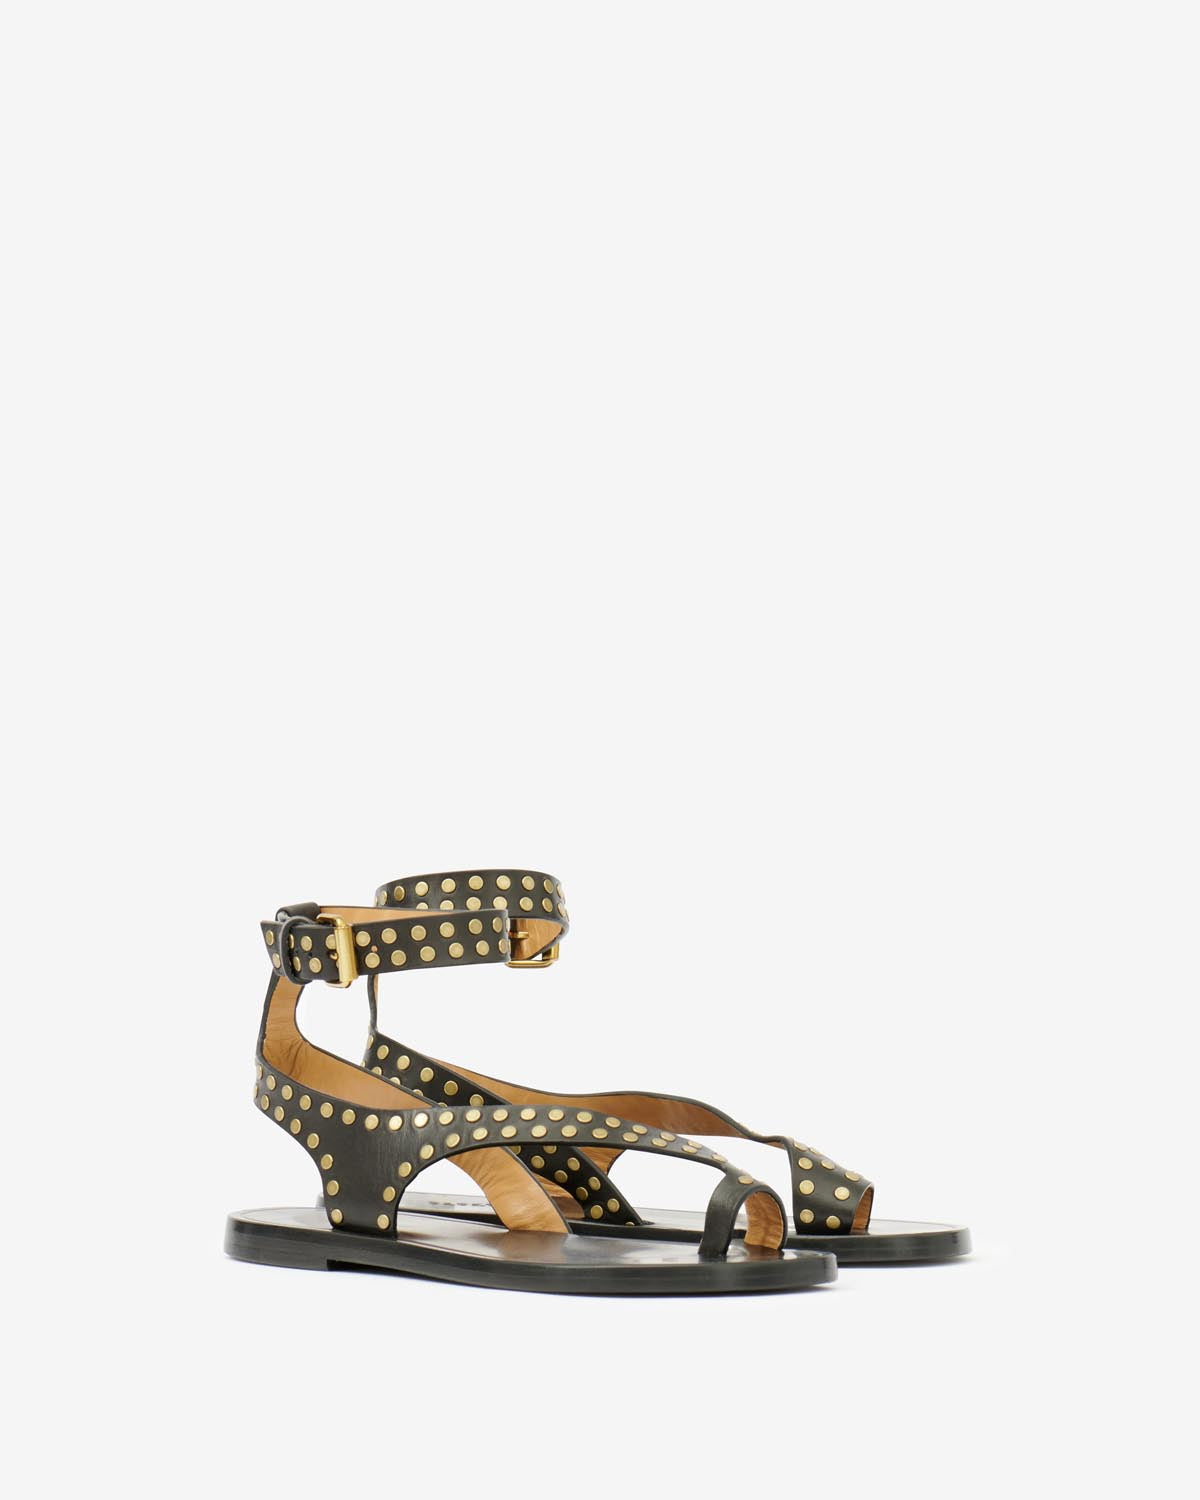 Jiona sandals Woman Black and gold 4